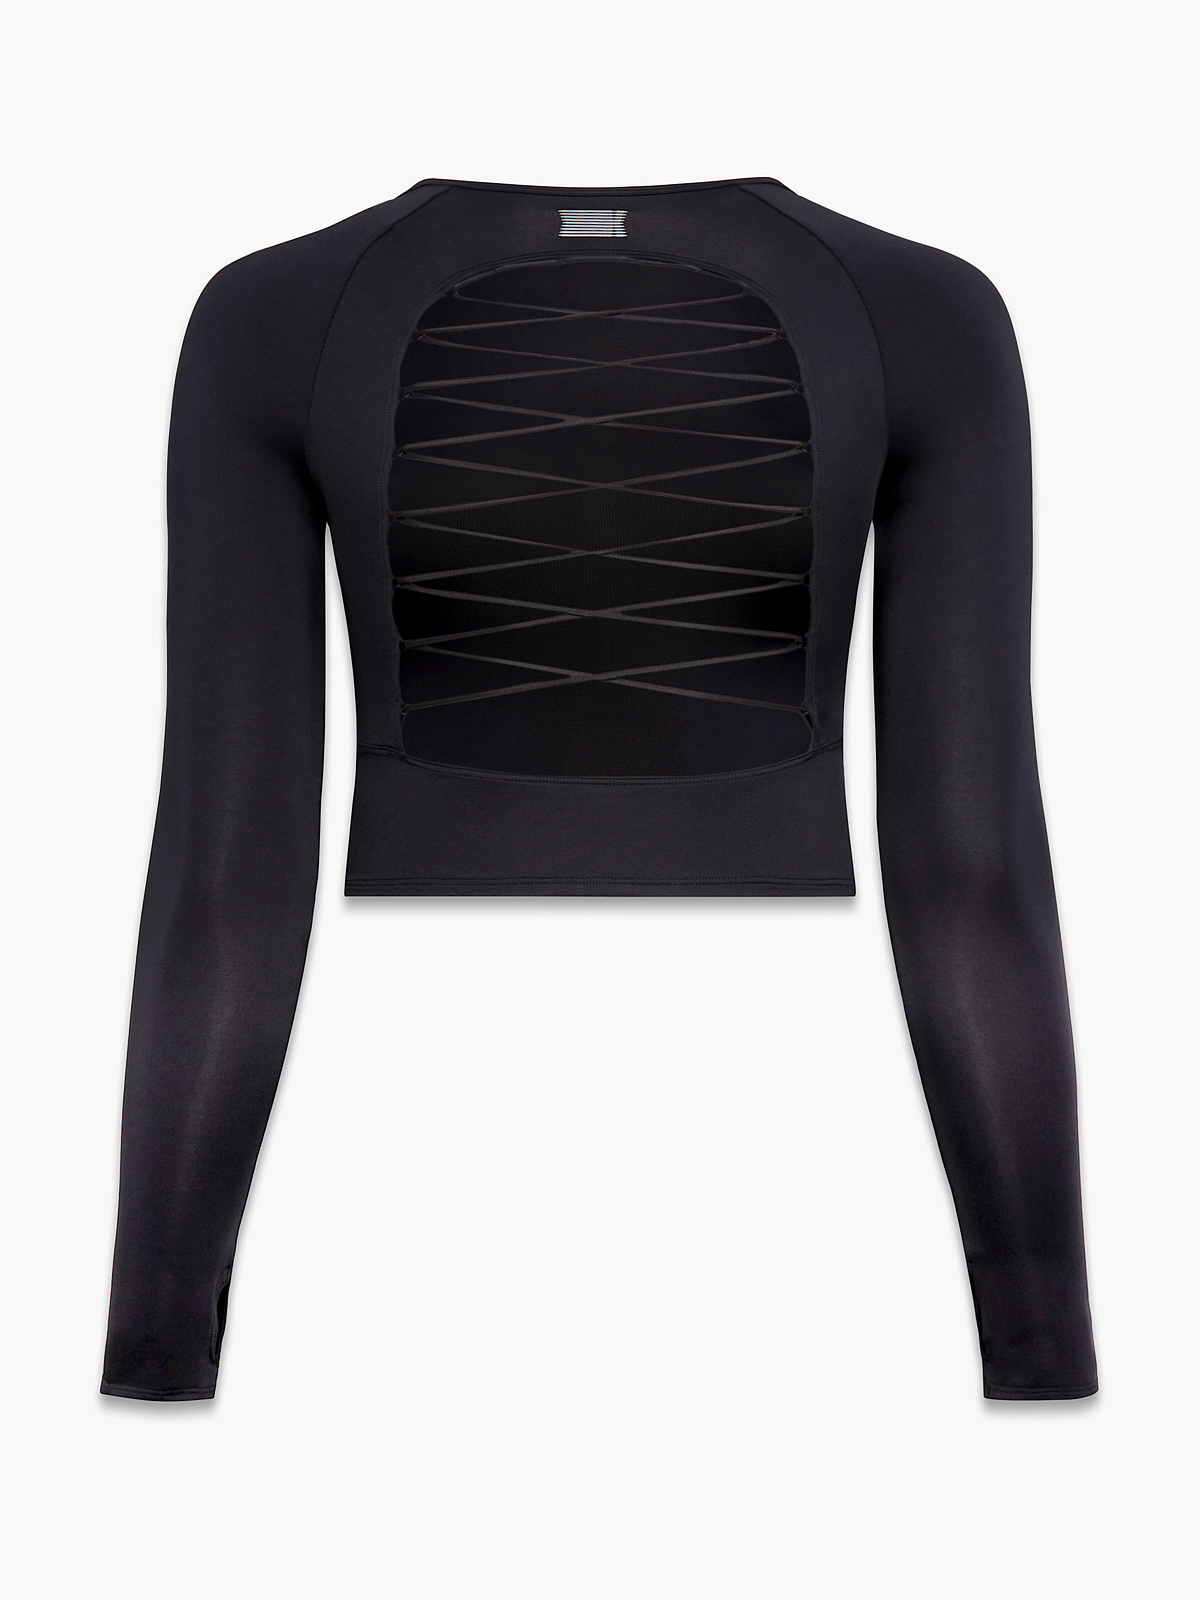 Lace Up Open-Back Long-Sleeve Top in Black | SAVAGE X FENTY